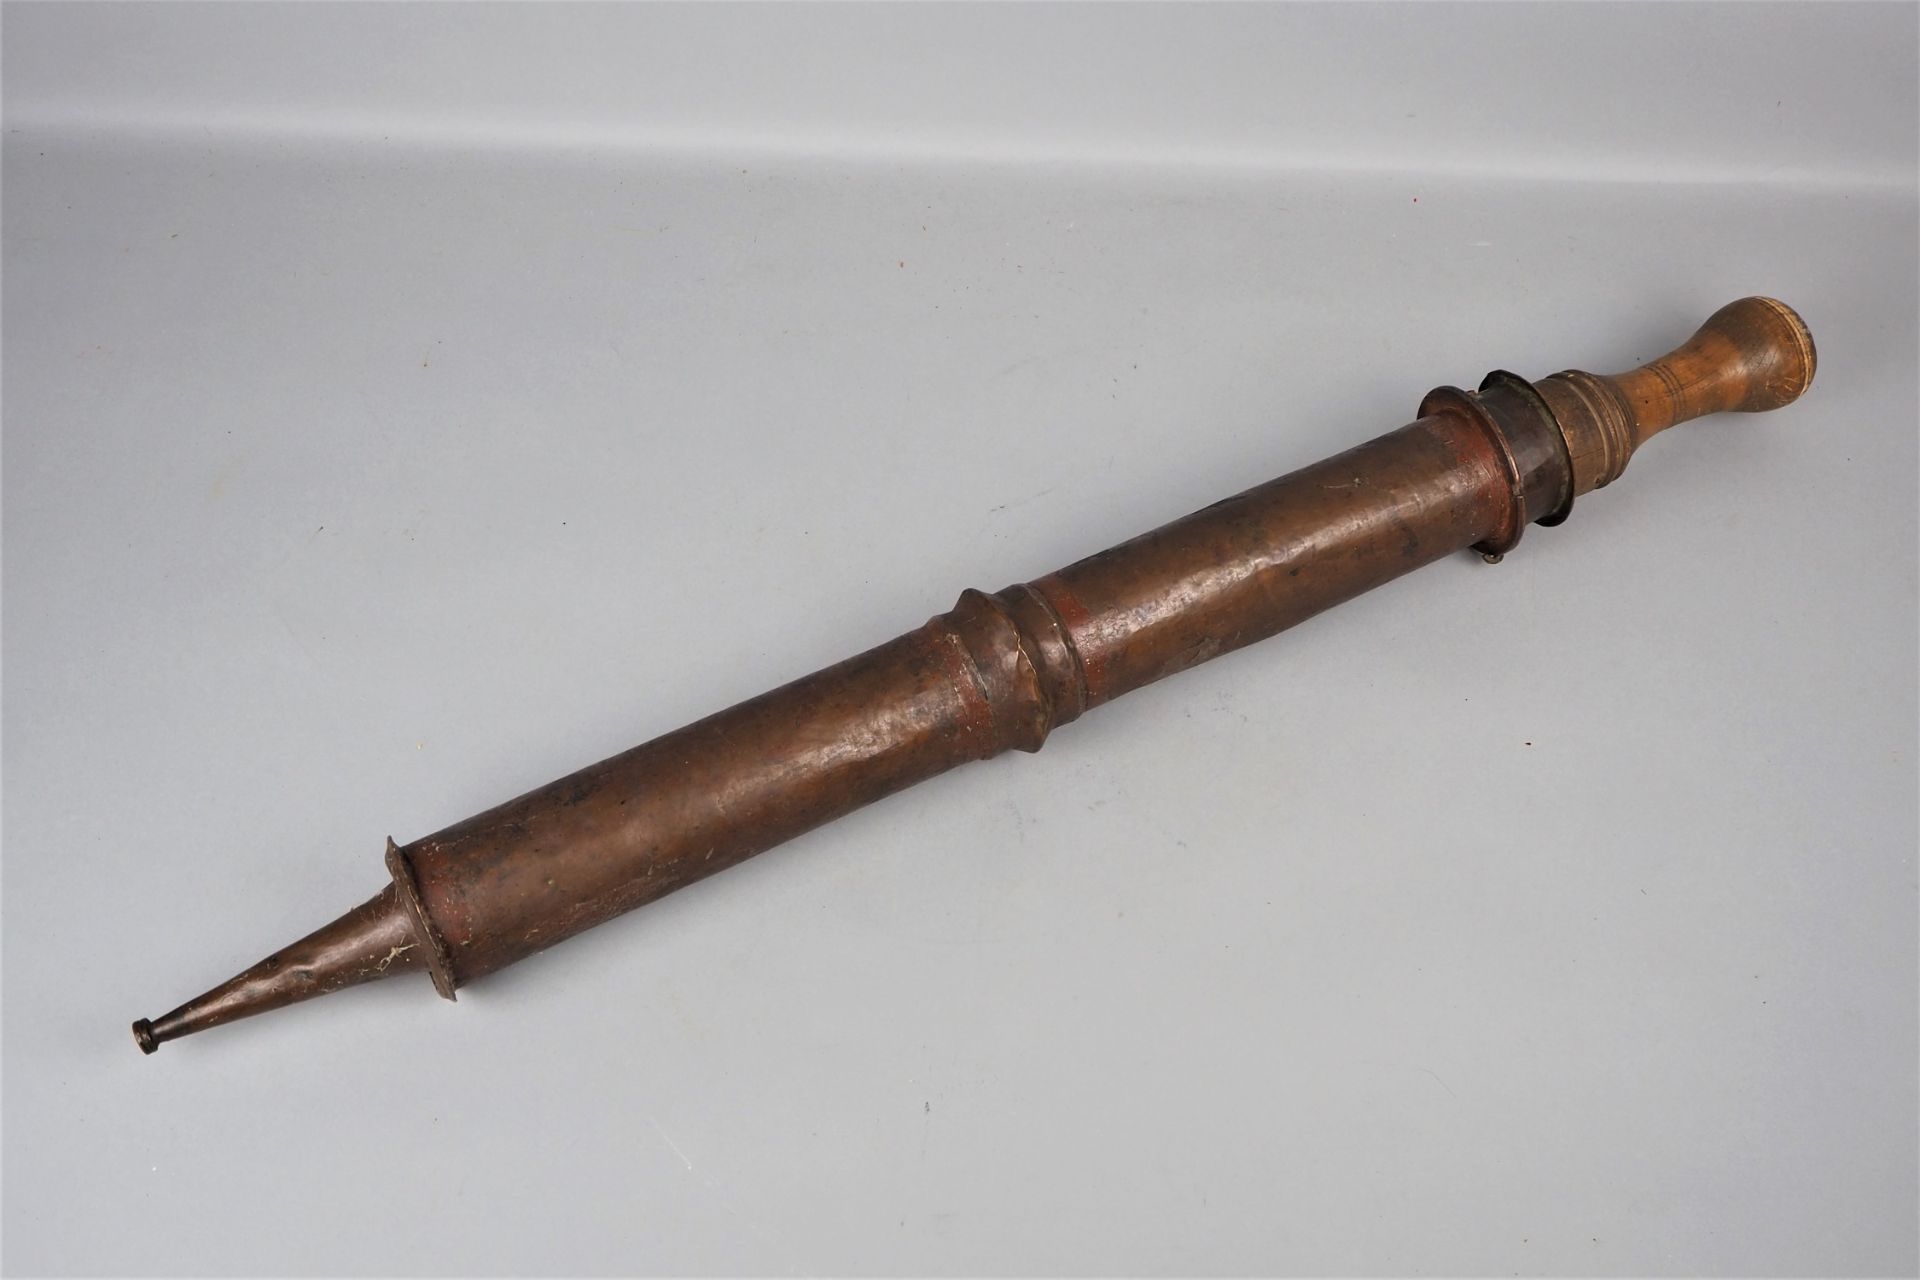 Domestic copper fire extinguisher, around 1800. - Image 3 of 3